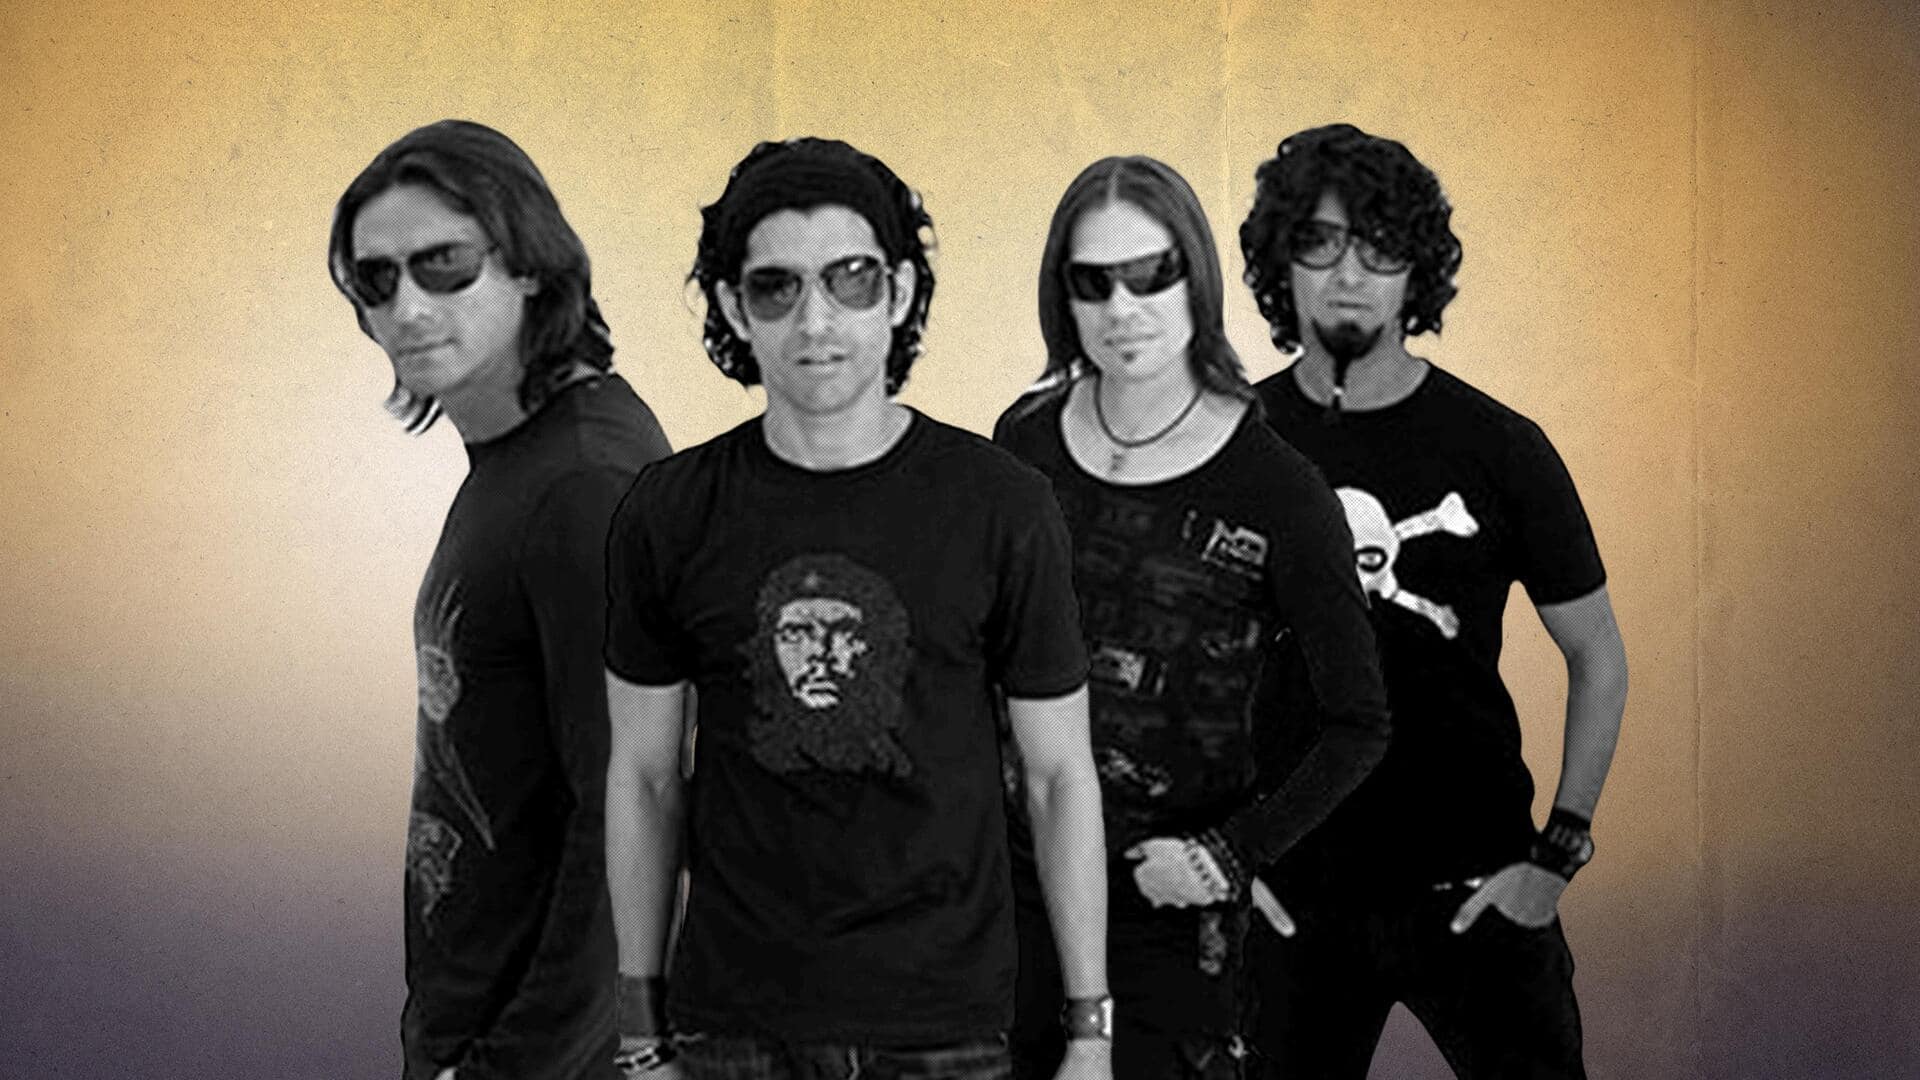 'Rock On!!': How Bollywood film changed landscape for rock bands